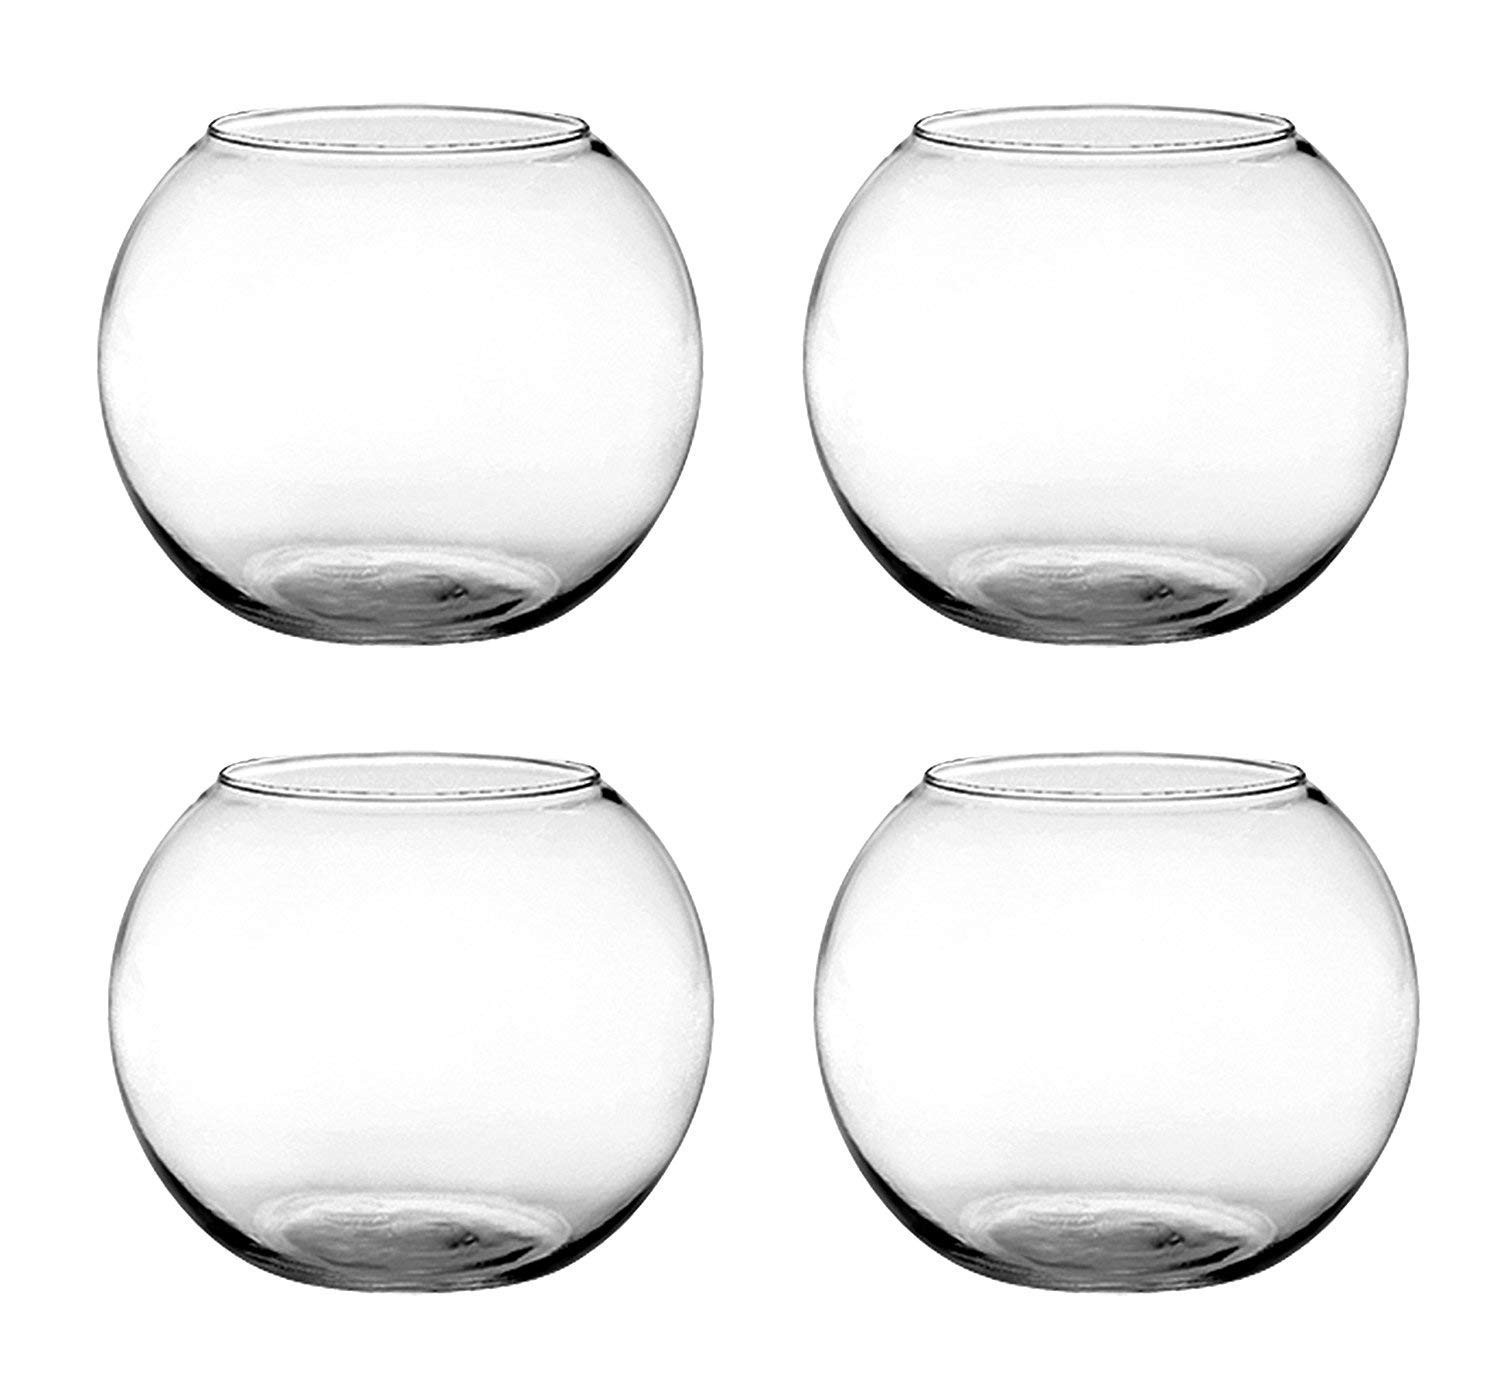 24 Fantastic Square Glass Vase Set 2024 free download square glass vase set of amazon com floral supply online set of 4 6 rose bowls glass with regard to amazon com floral supply online set of 4 6 rose bowls glass round vases for weddings event